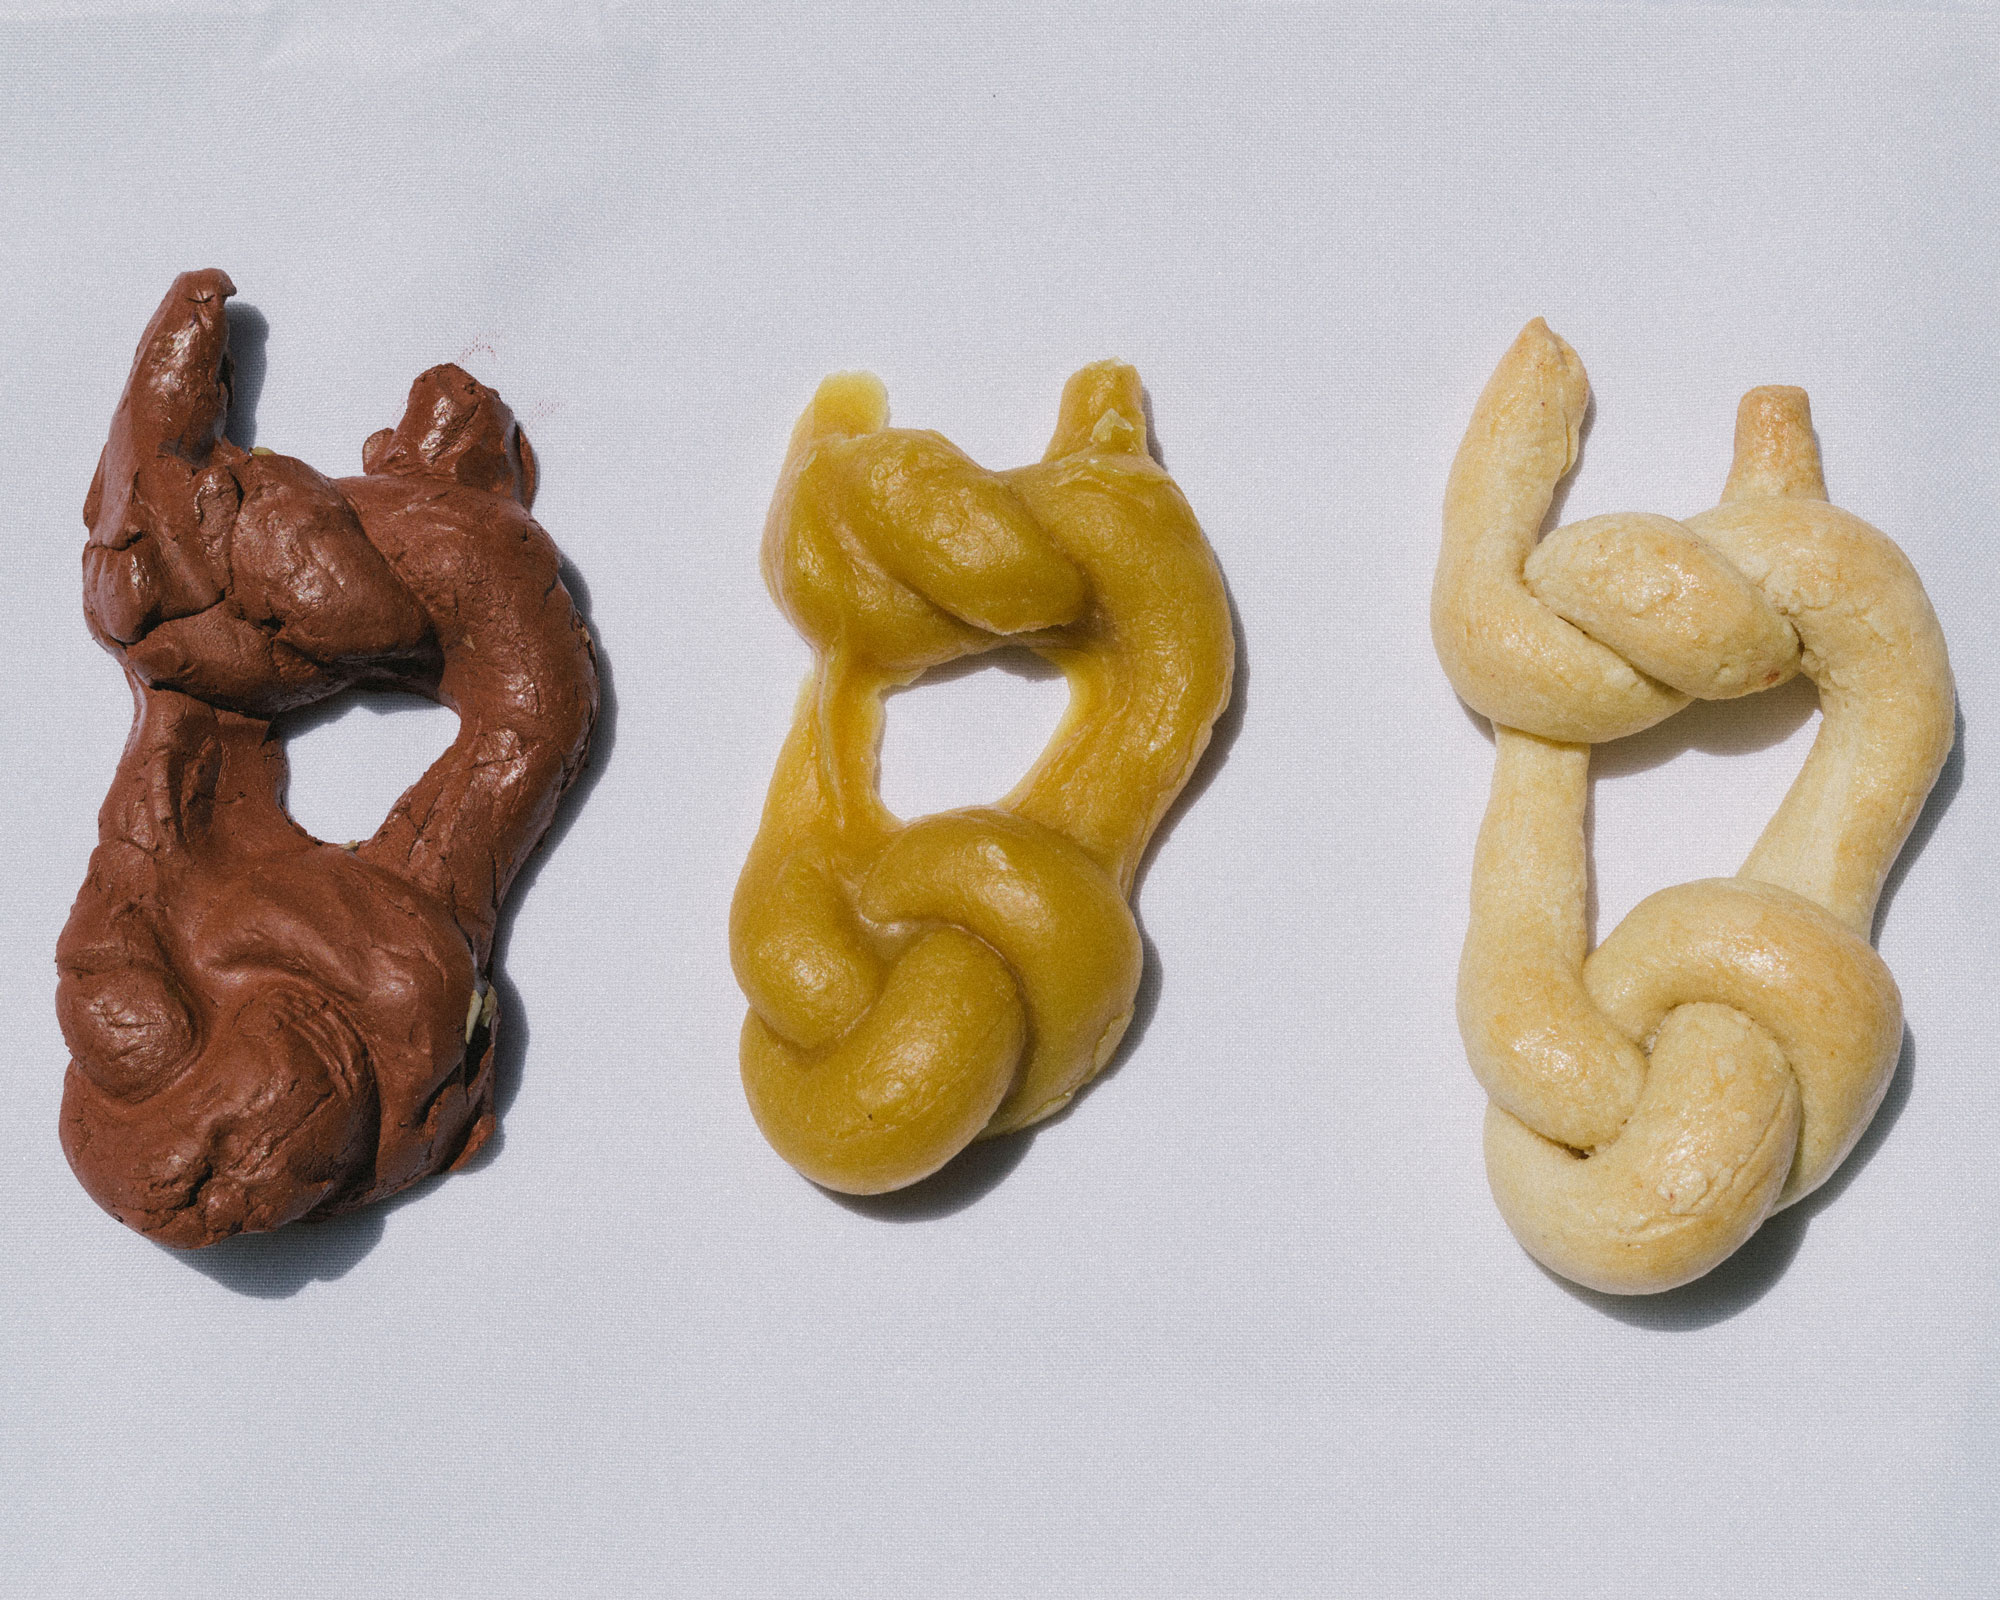 Three bread sculptures are arranged in a horizontal line. Each sculpture is identical and in the shape of two knots. They are arranged in ascending color order from dark brown, to yellow beige, to white beige.